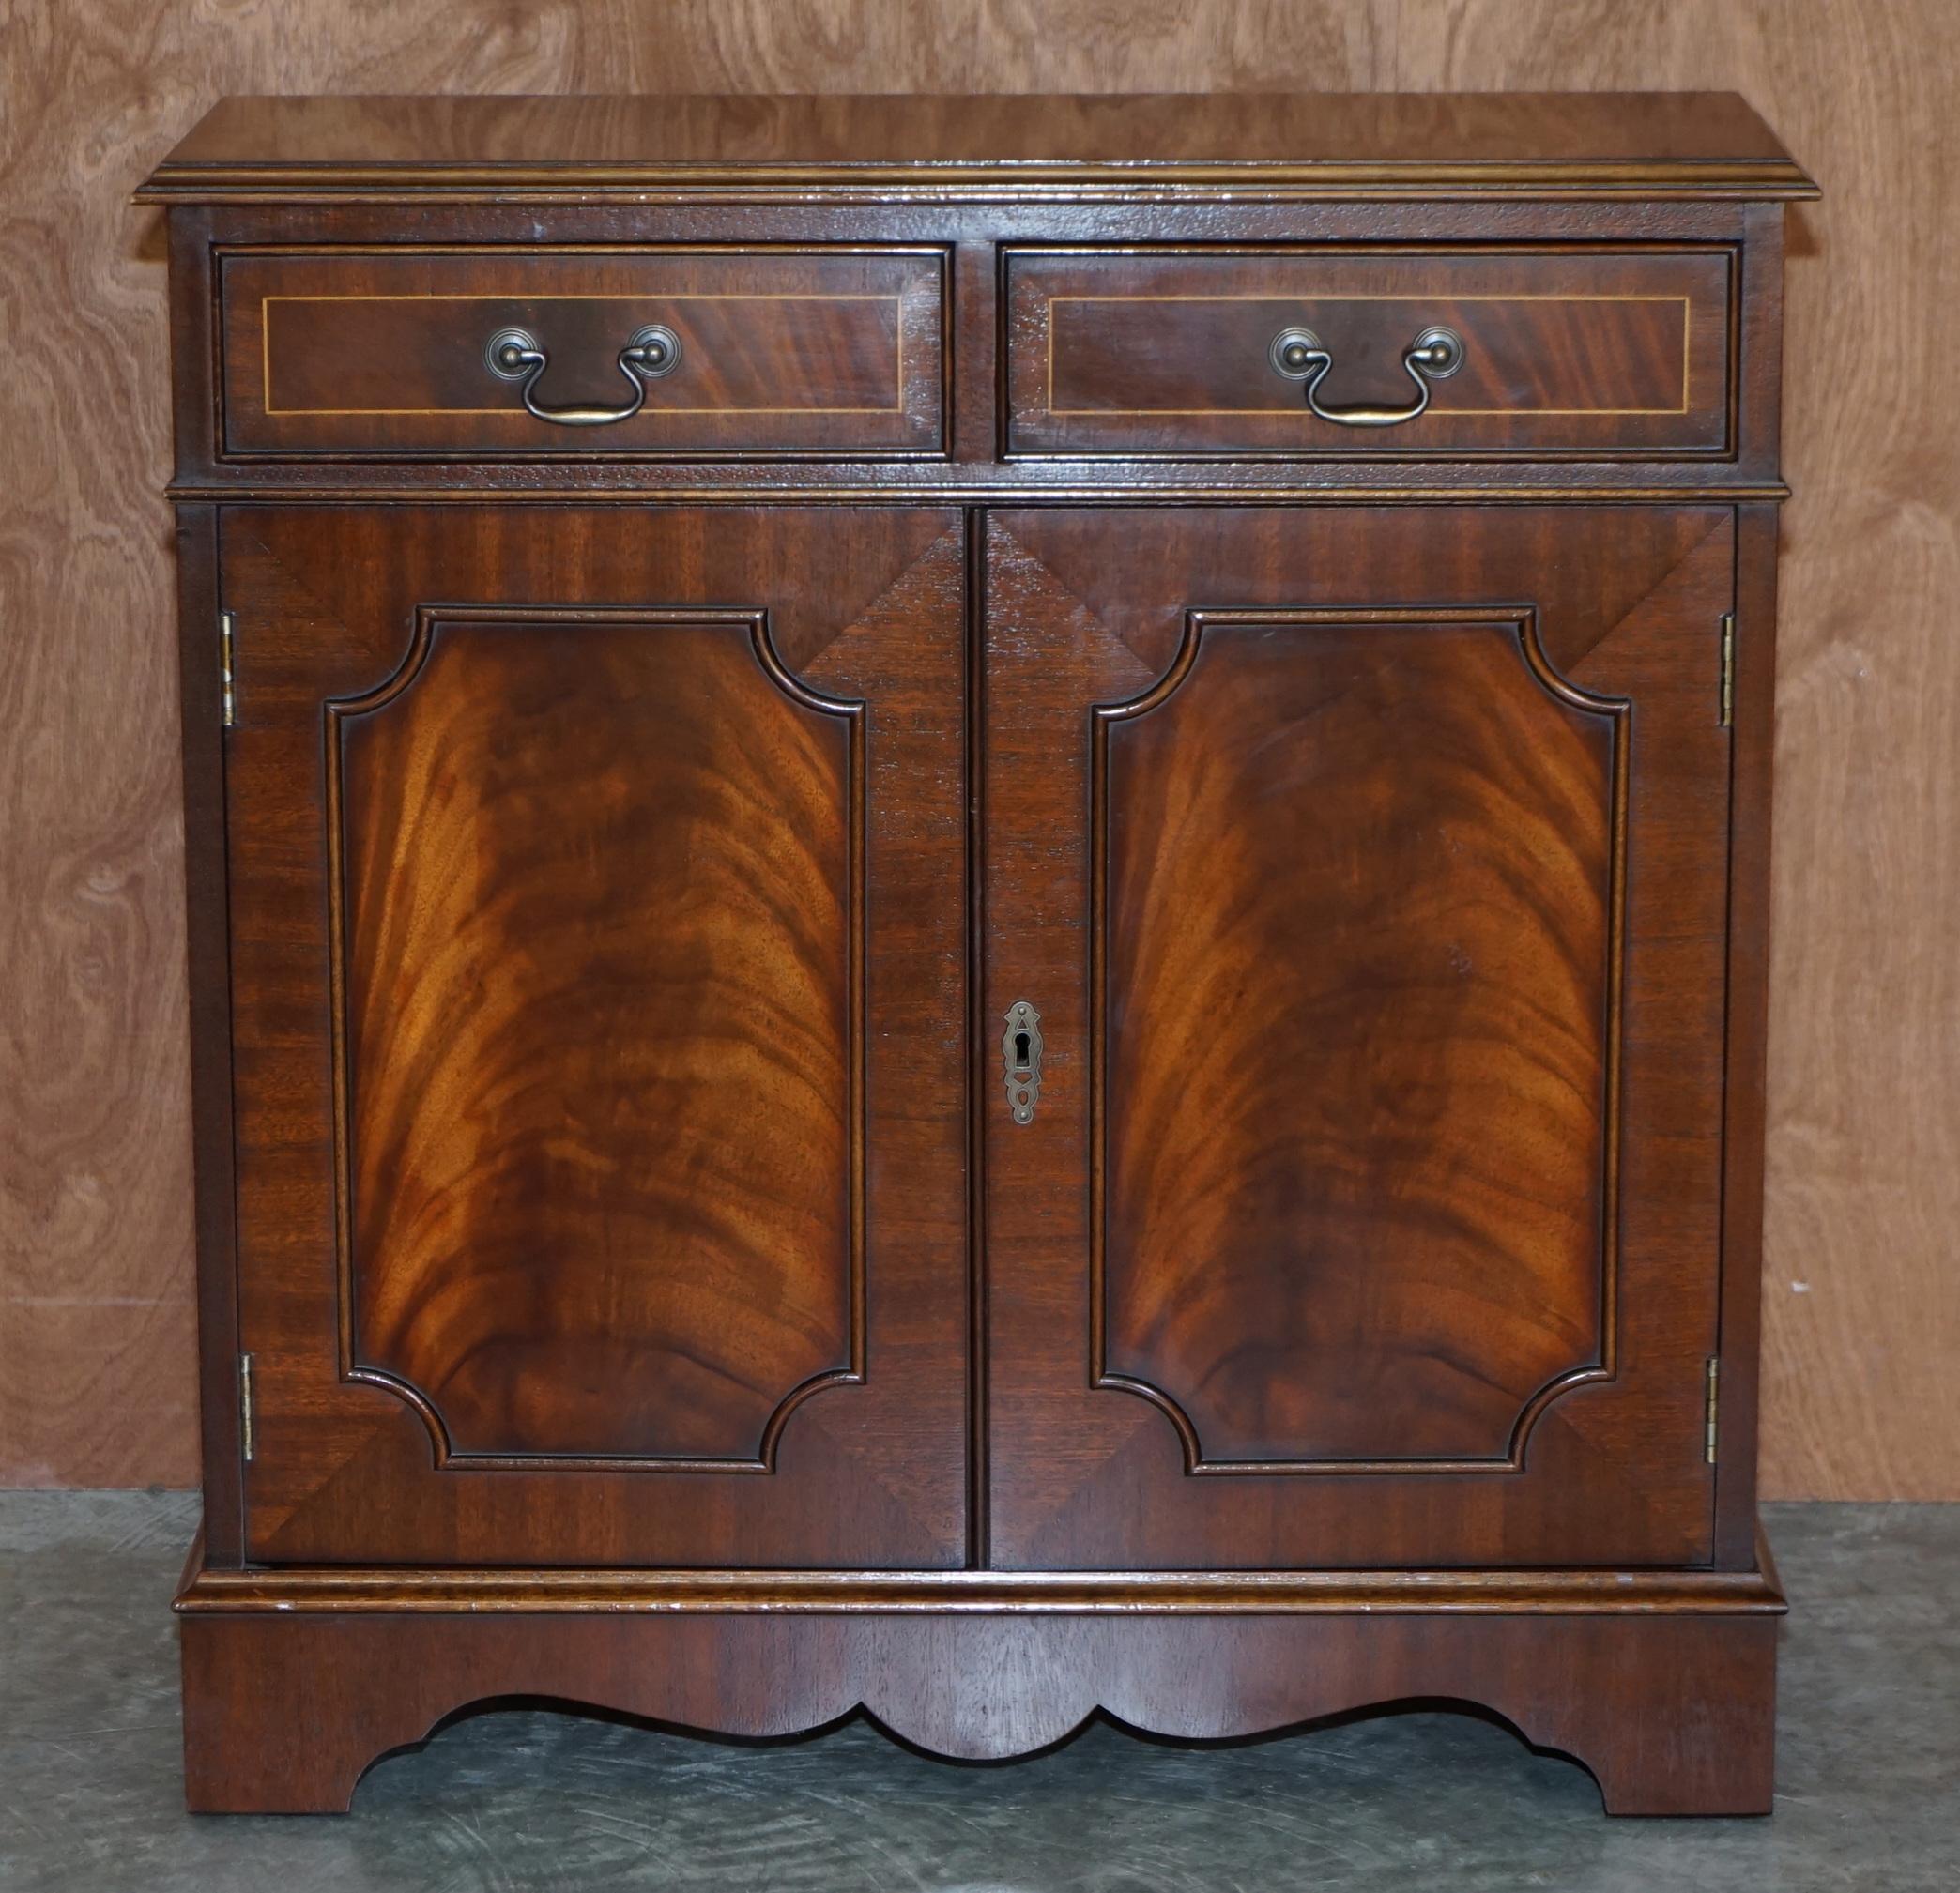 We are delighted to offer for sale this lovely hand made in England vintage flamed mahogany open library bookcase with twin drawers

This piece is in good used condition, the drawers run smoothly. The frame is a mixed hardwood frame with luxury